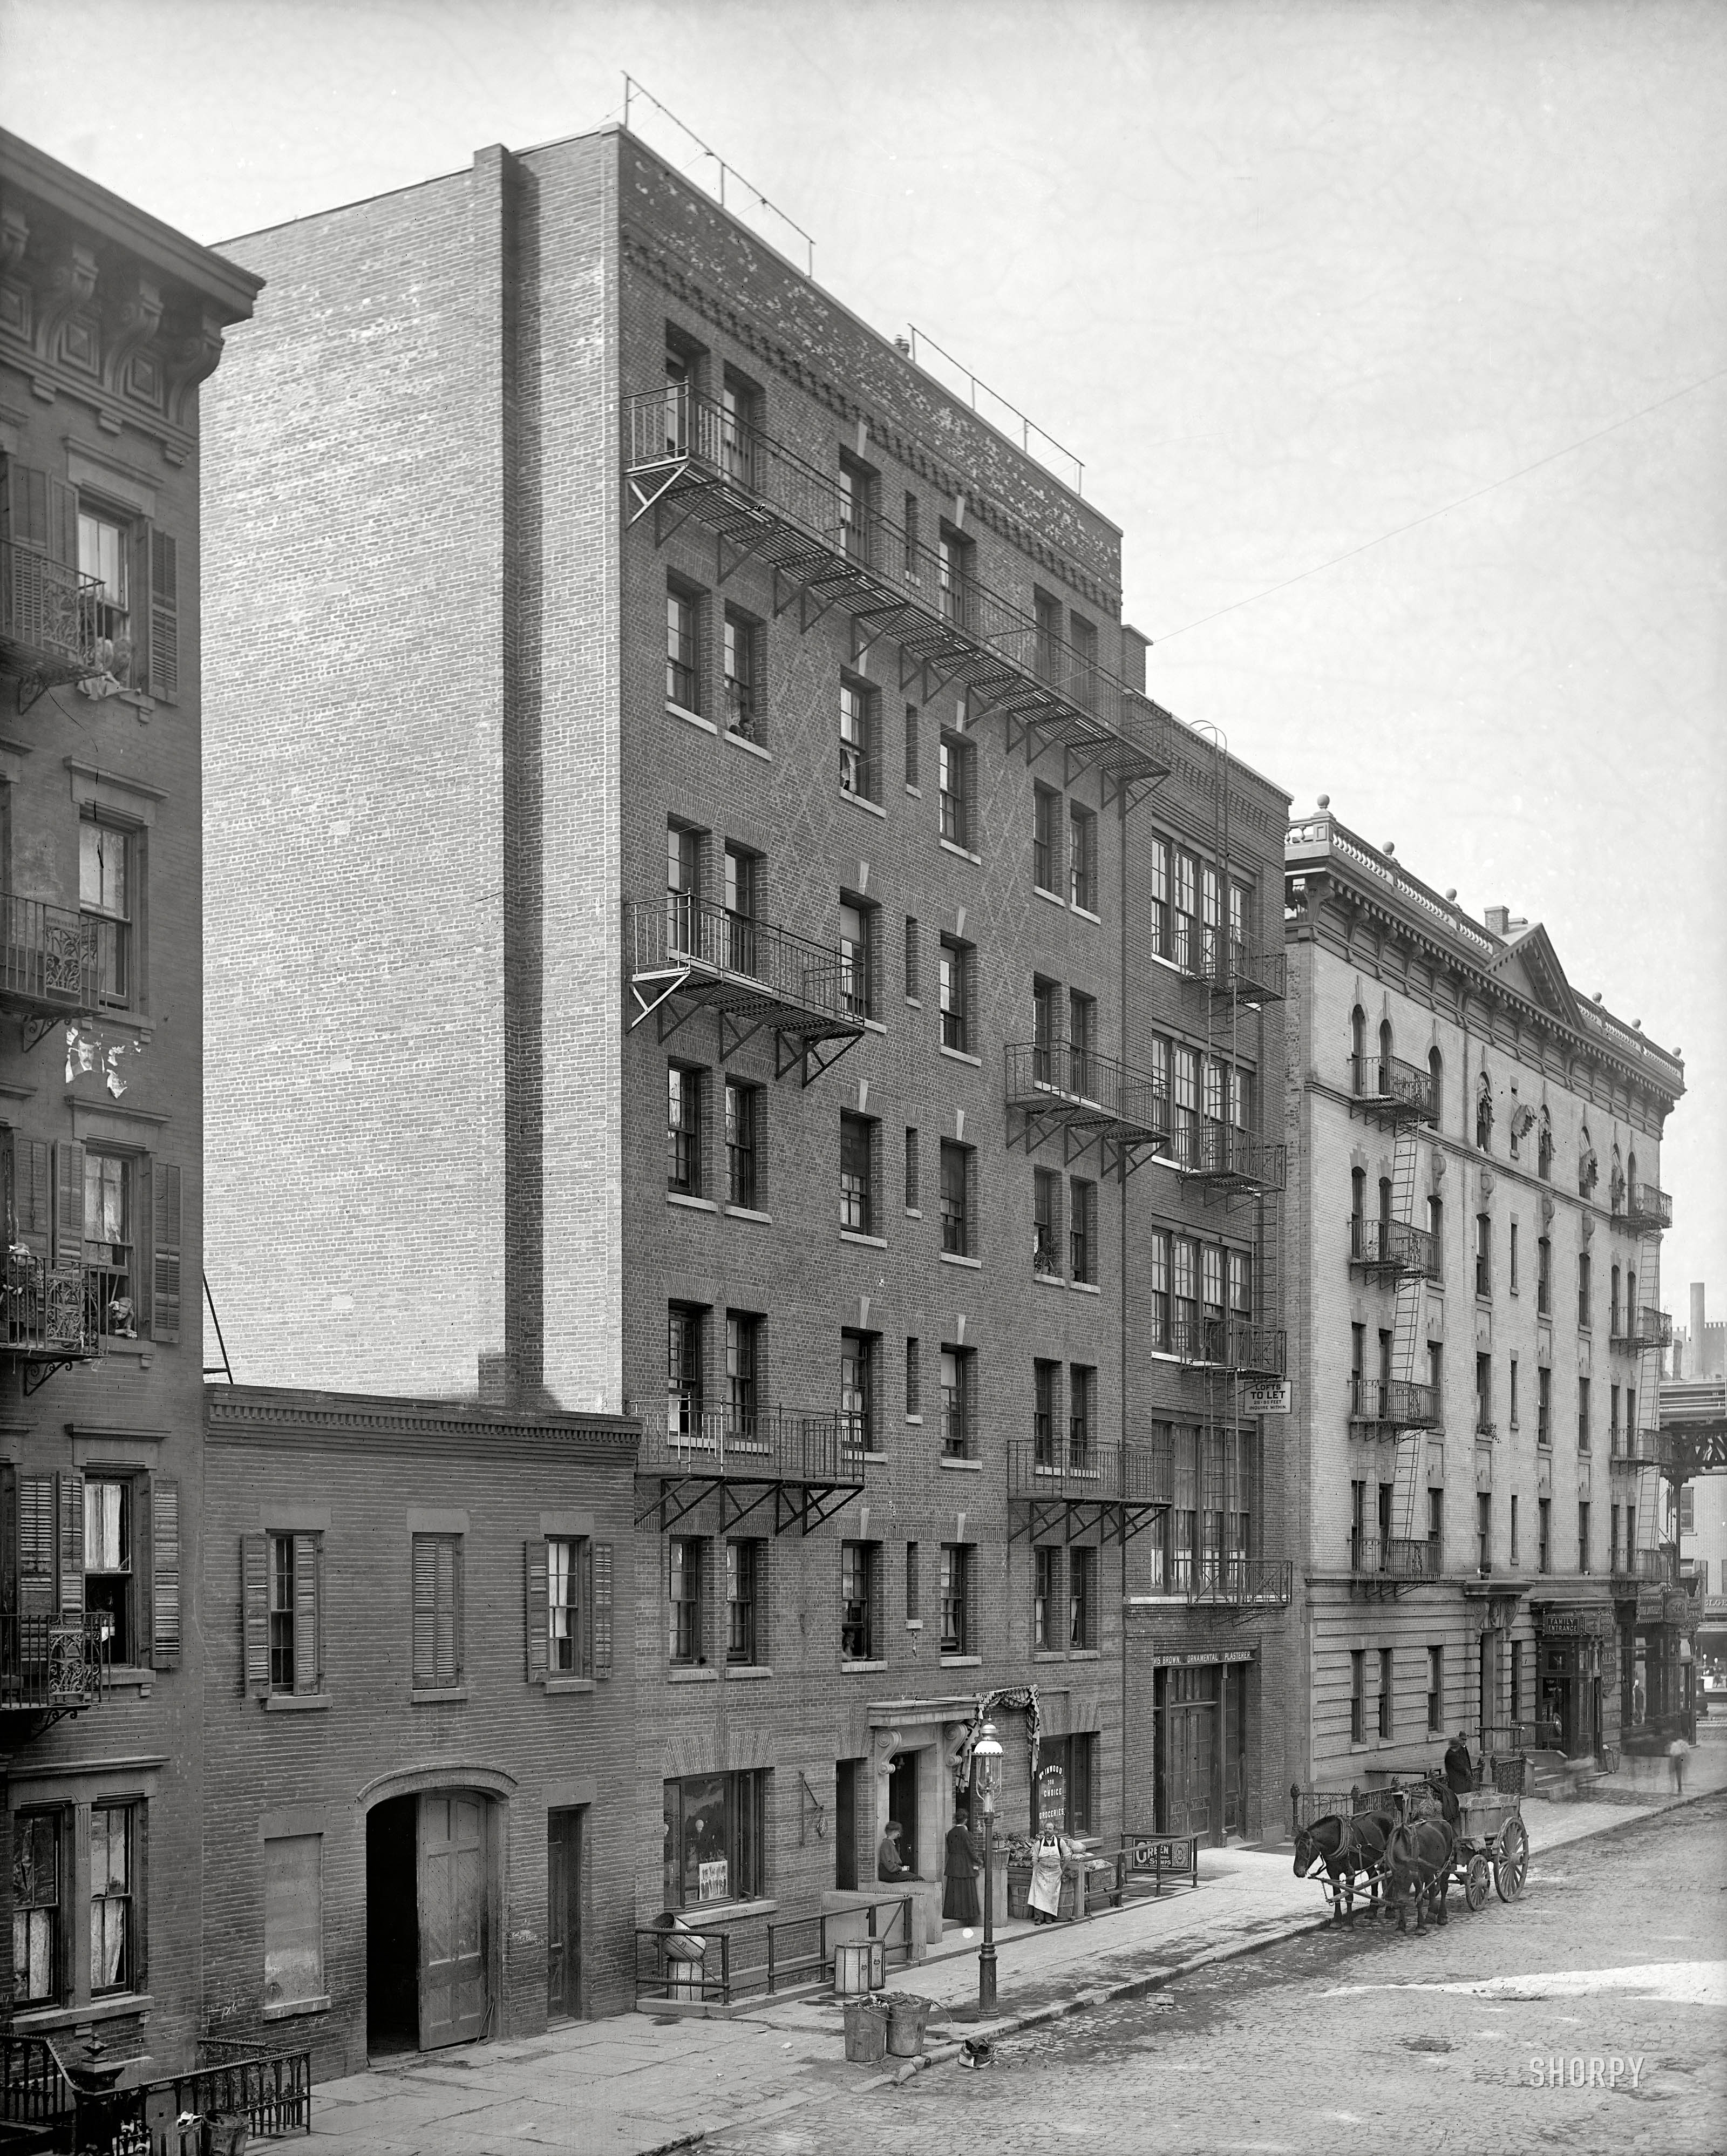 New York circa 1905. "Exterior of tenement house." Another view of the building on East 40th Street seen here. 8x10 inch glass negative. View full size.